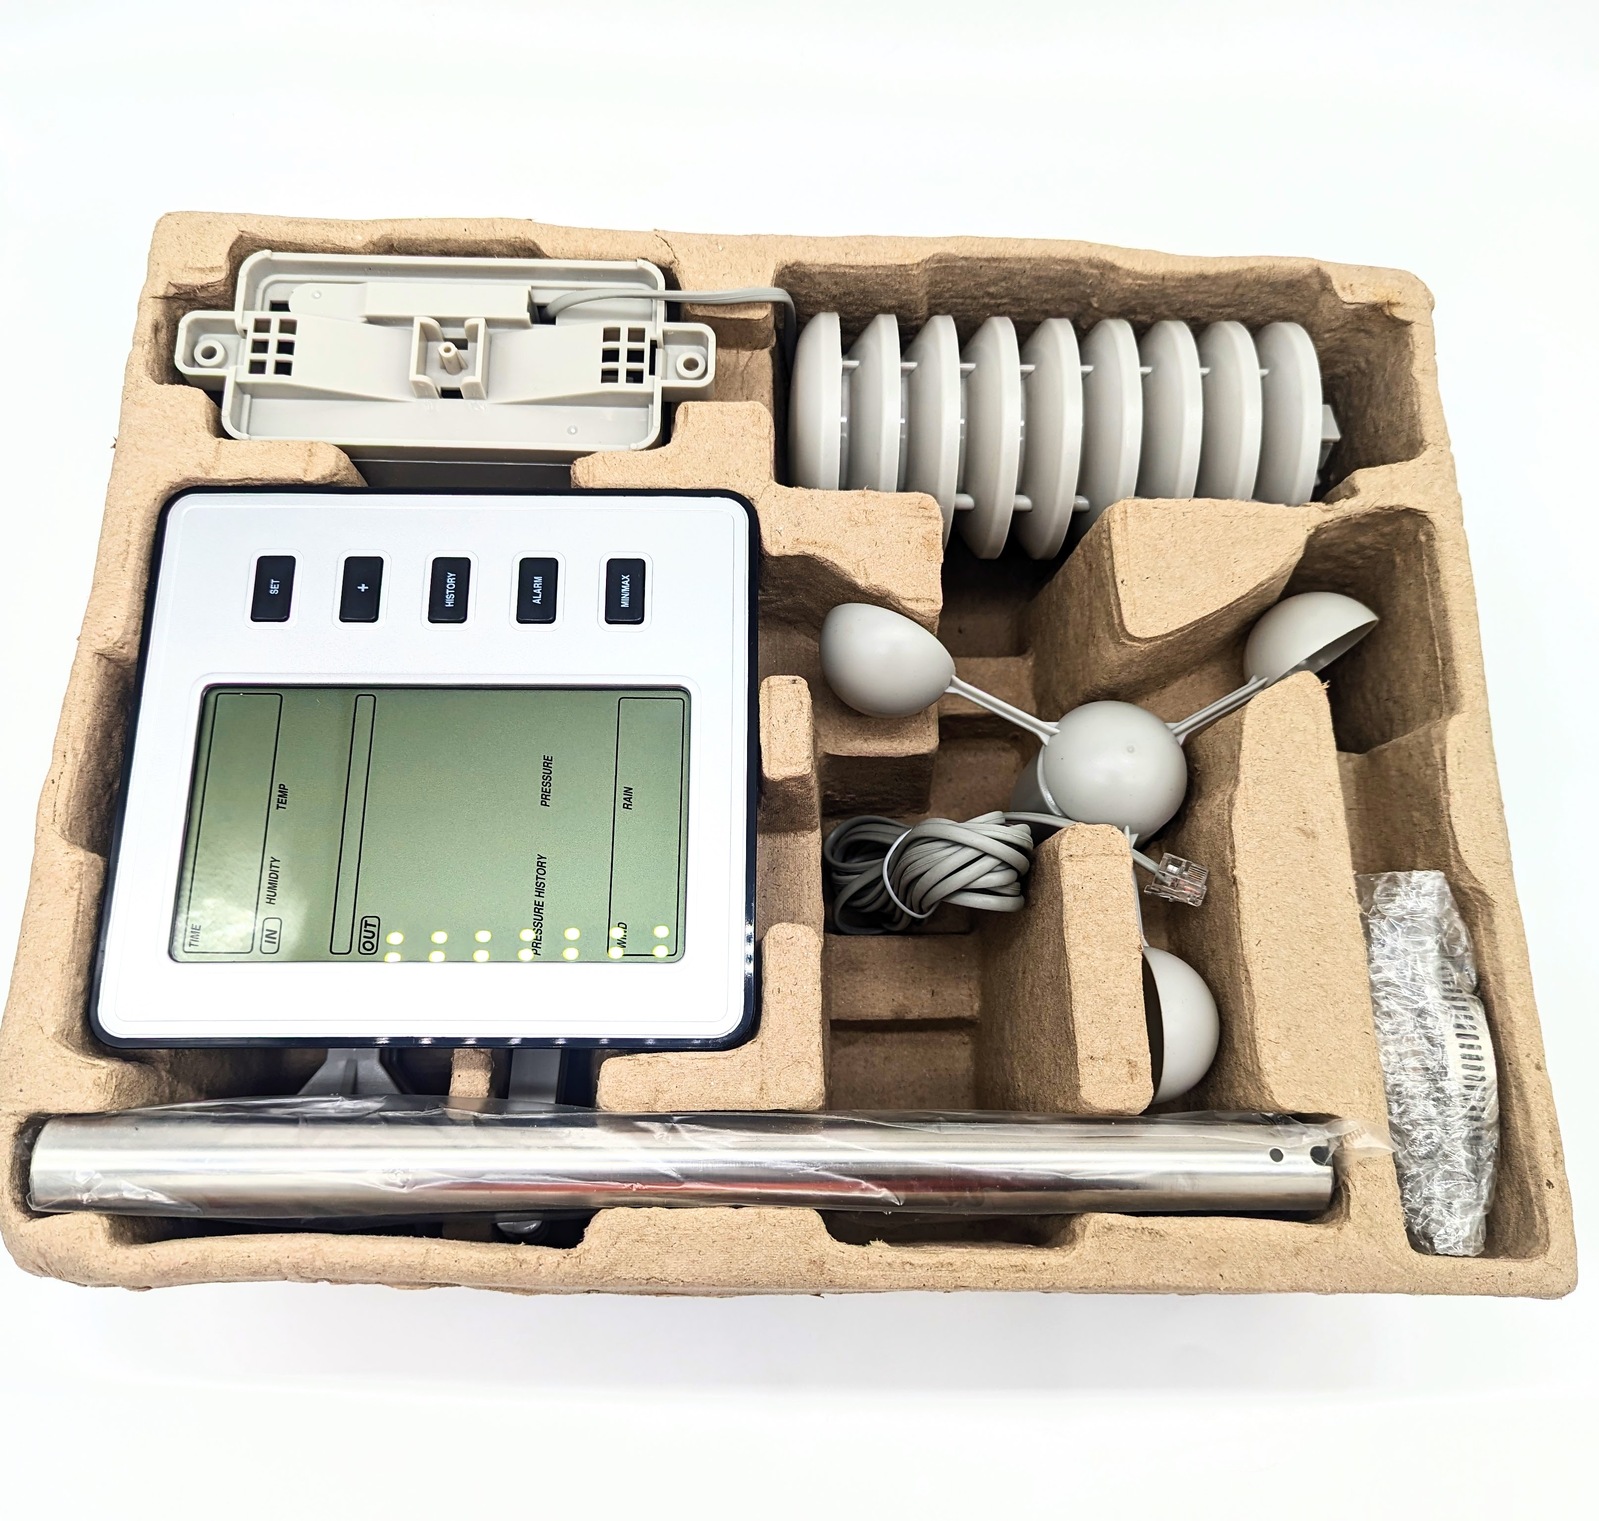 Professional Wireless Weather Station Earthcore + Accessories